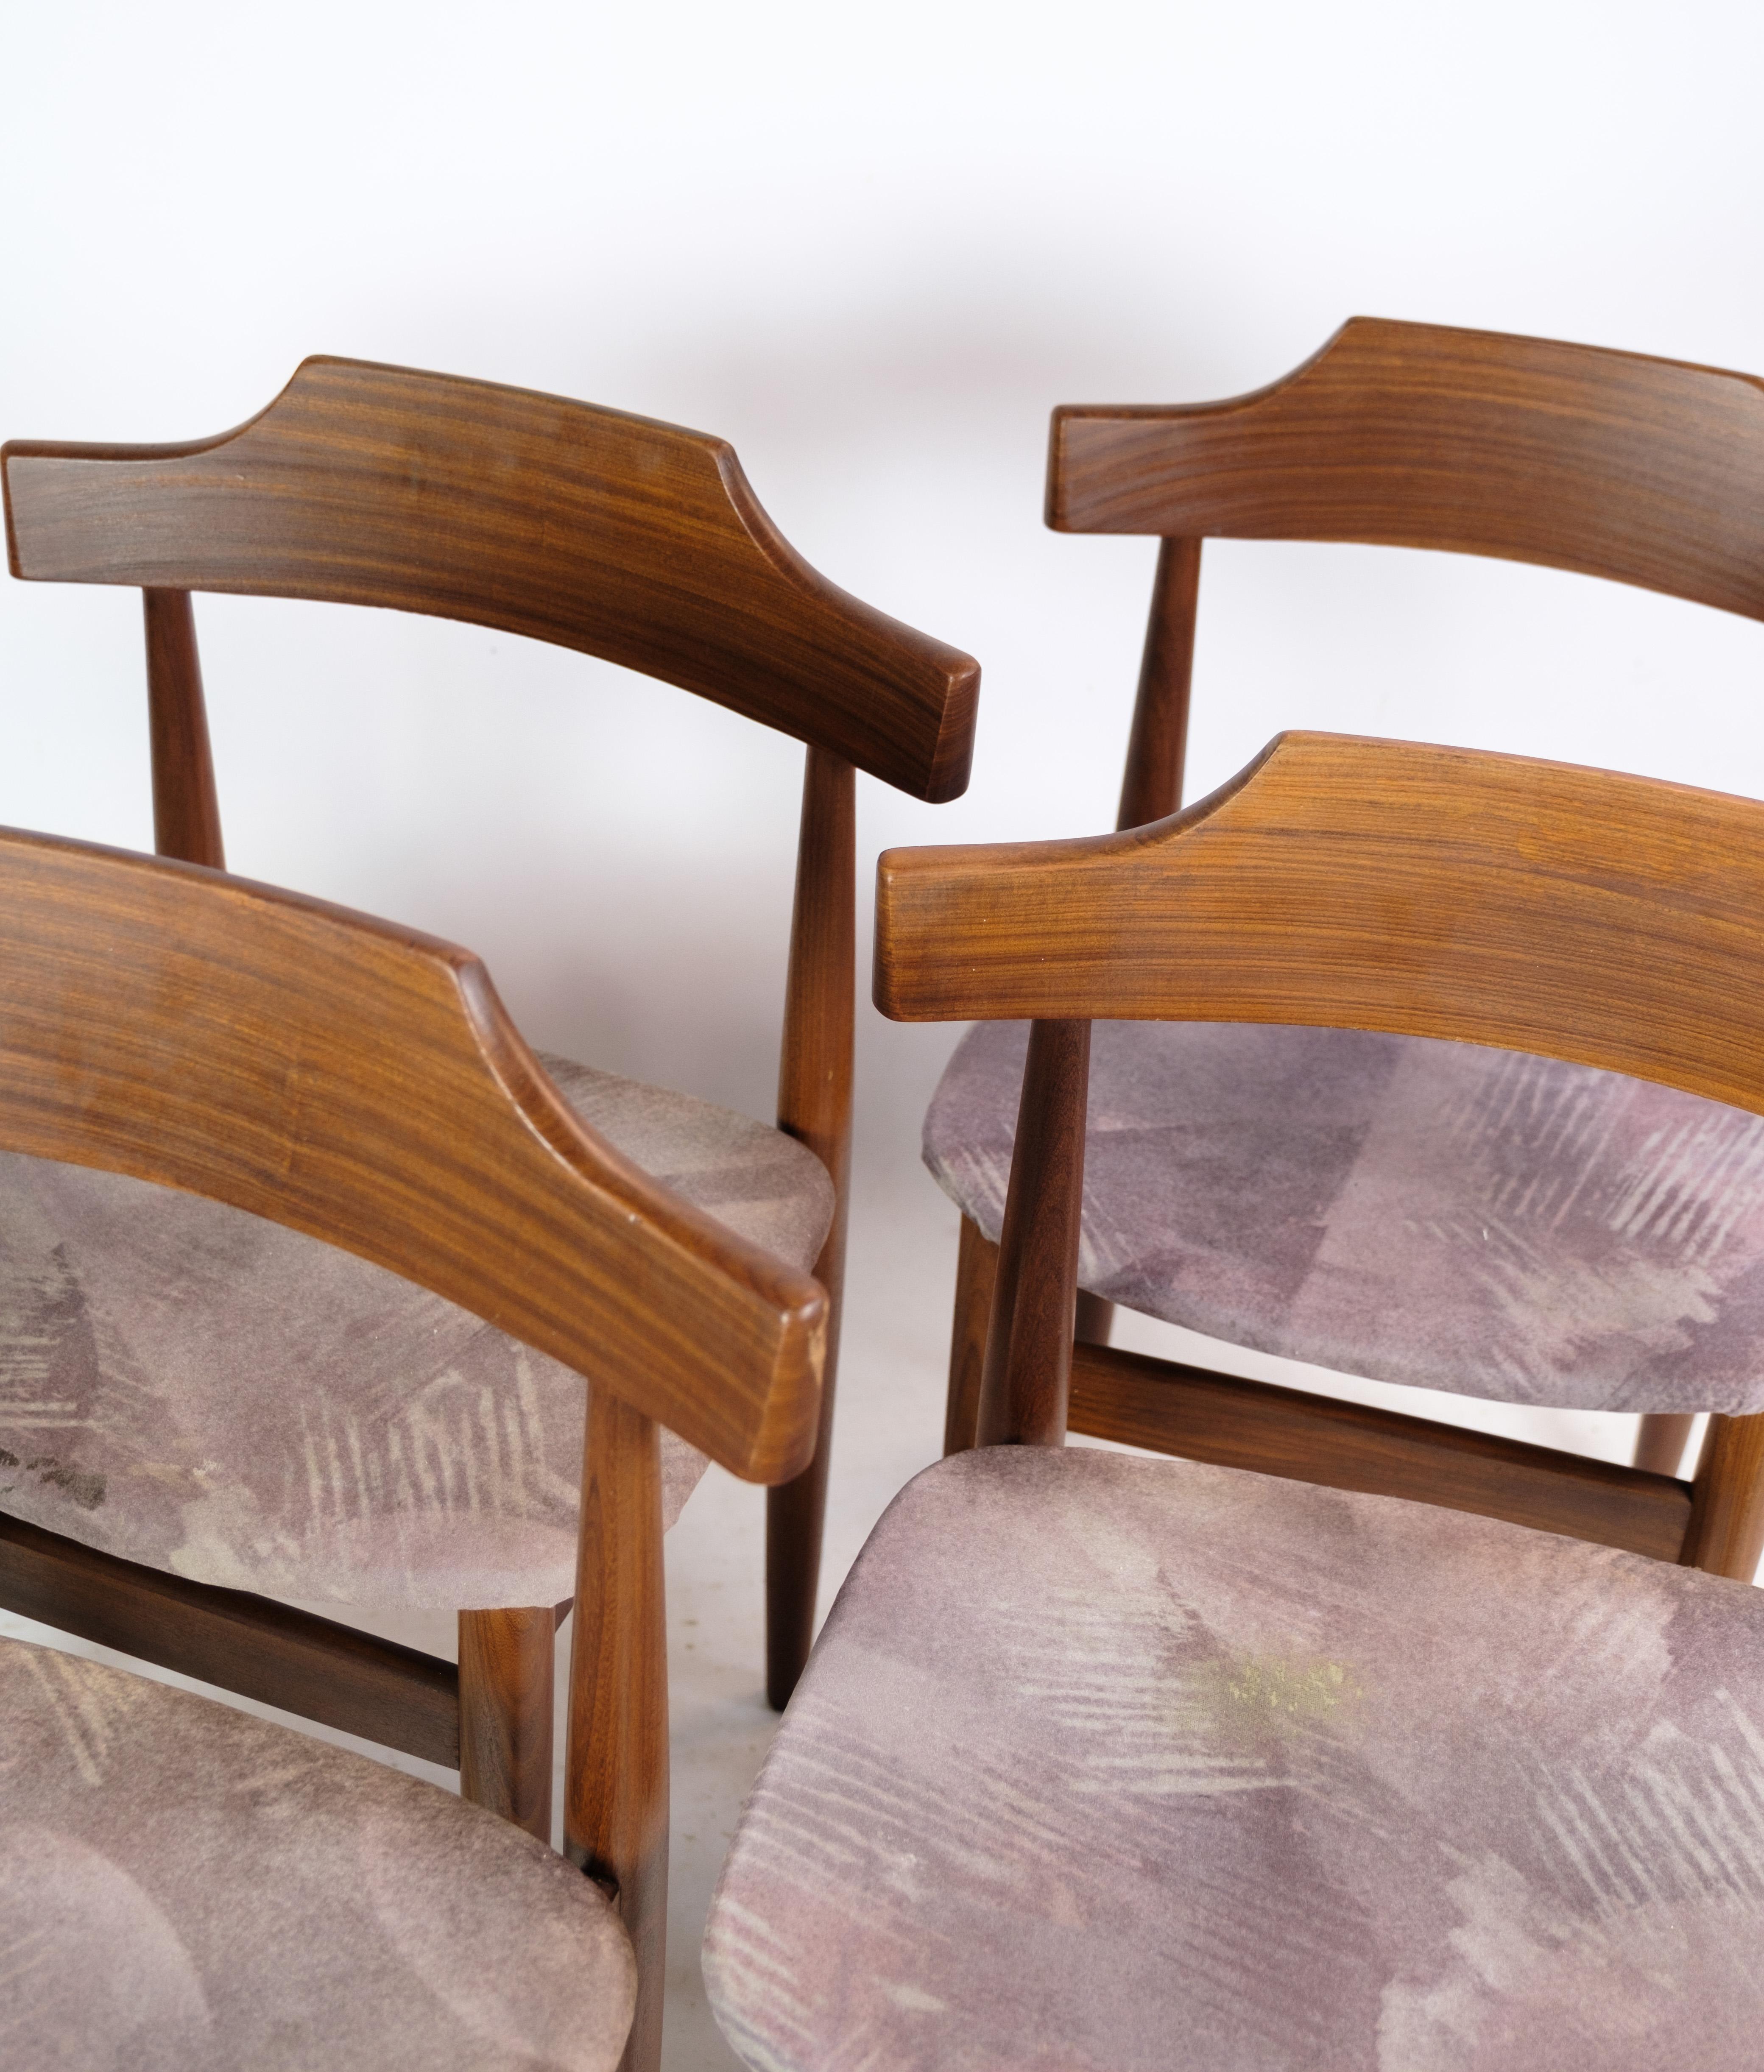 Set of 4 dining chairs in teak wood and grey fabric designed by Hans Olsen from the 1960s. The chairs are in nice used condition.

This product will be inspected thoroughly at our professional workshop by our educated employees, who assure the